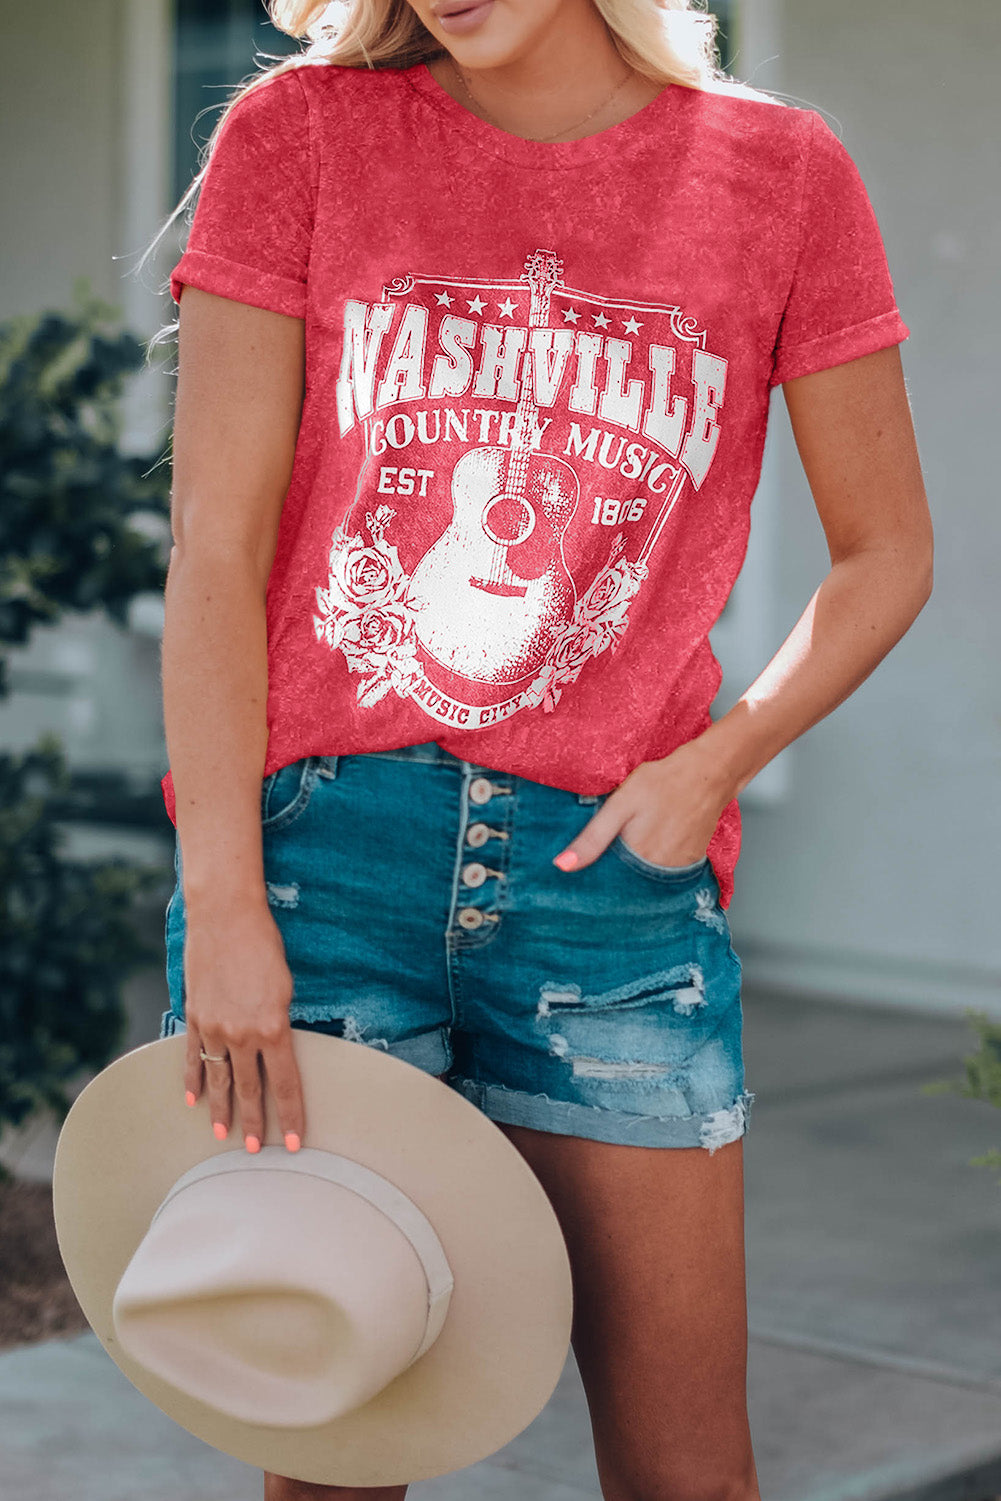 NASHVILLE COUNTRY MUSIC Graphic Round Neck Tee Shirt - Cheeky Chic Boutique